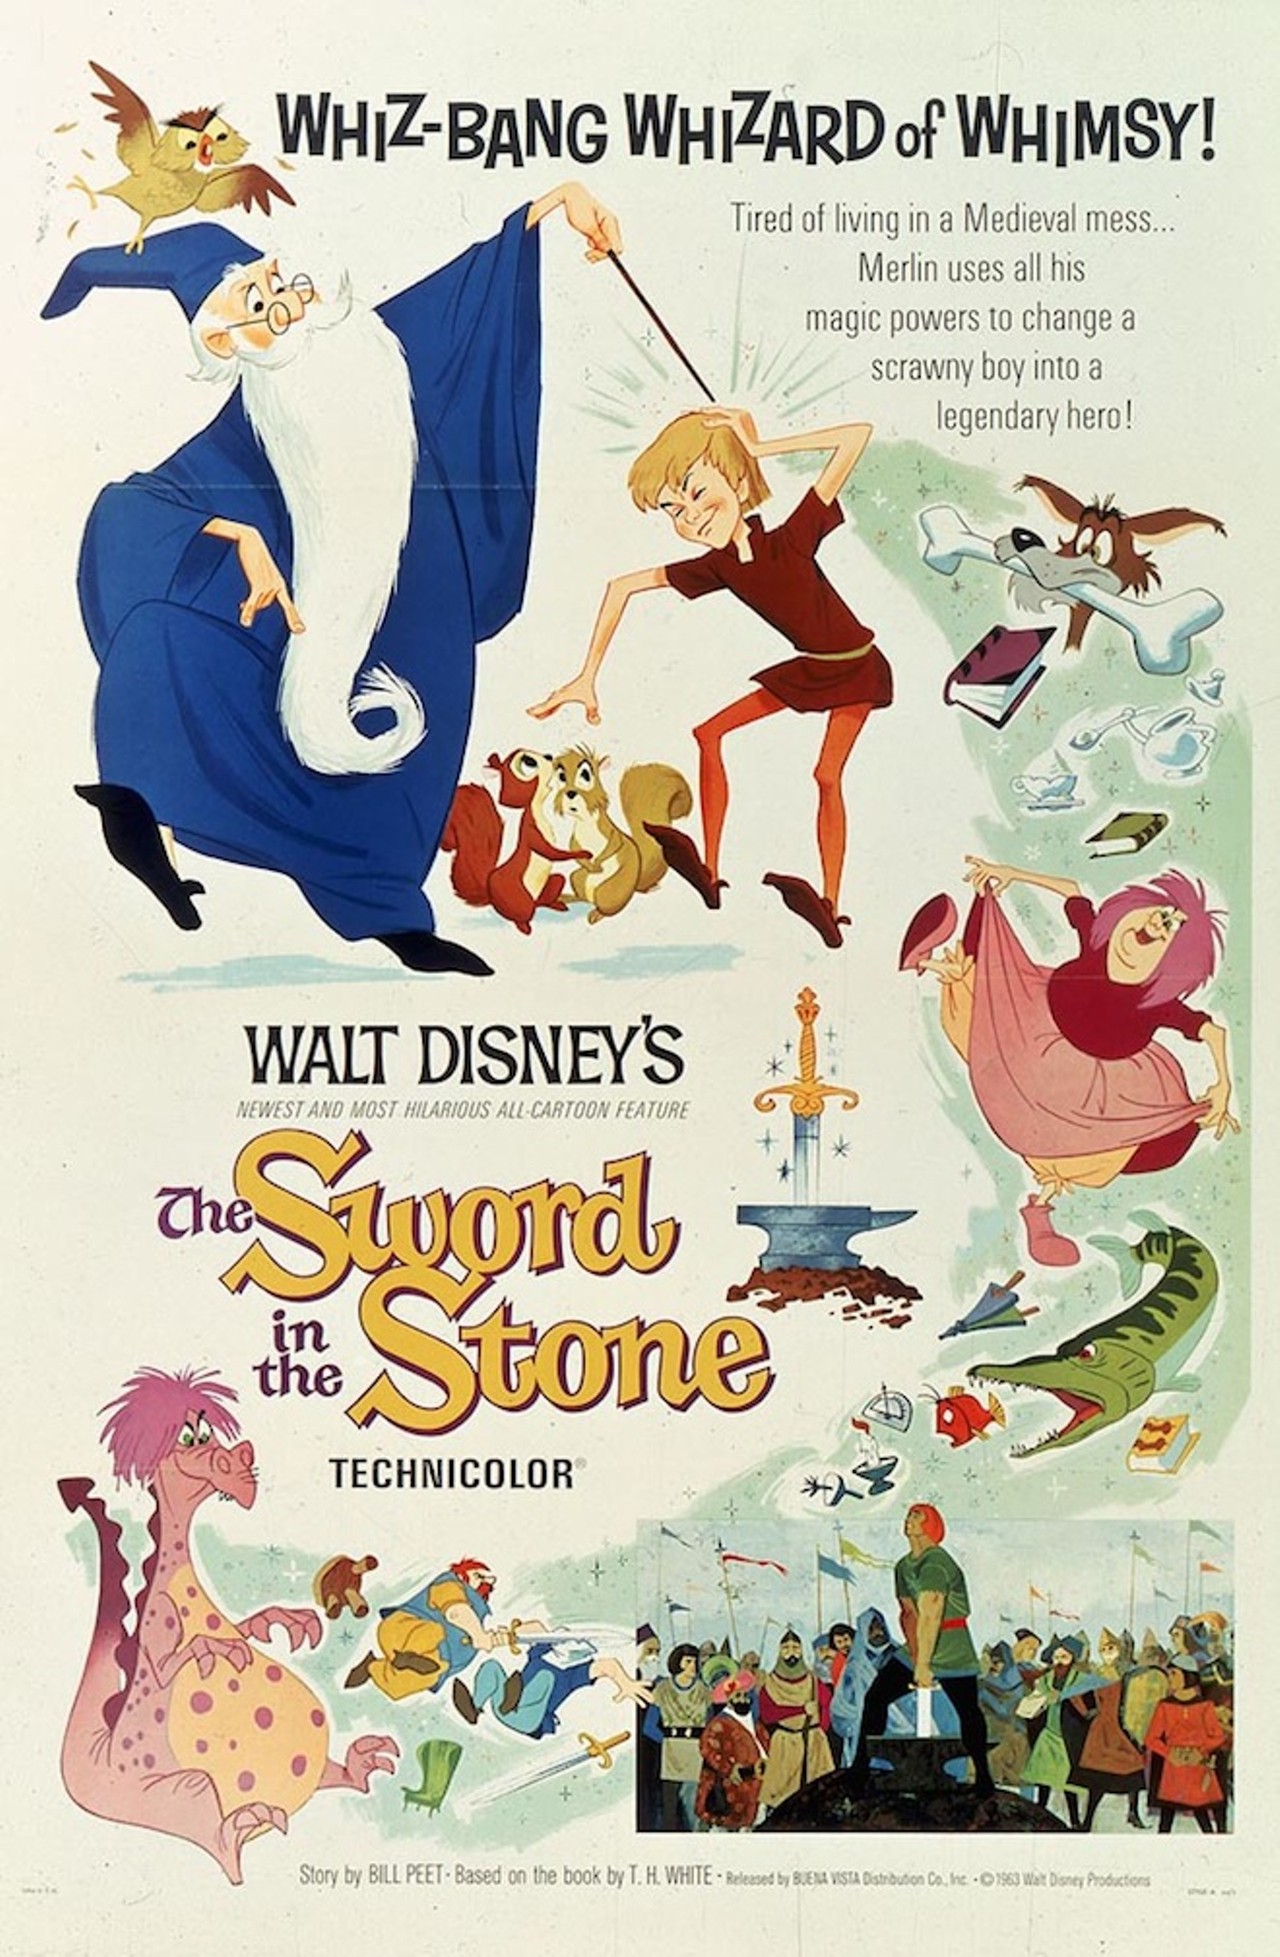 15 iconic posters of Disney animated films